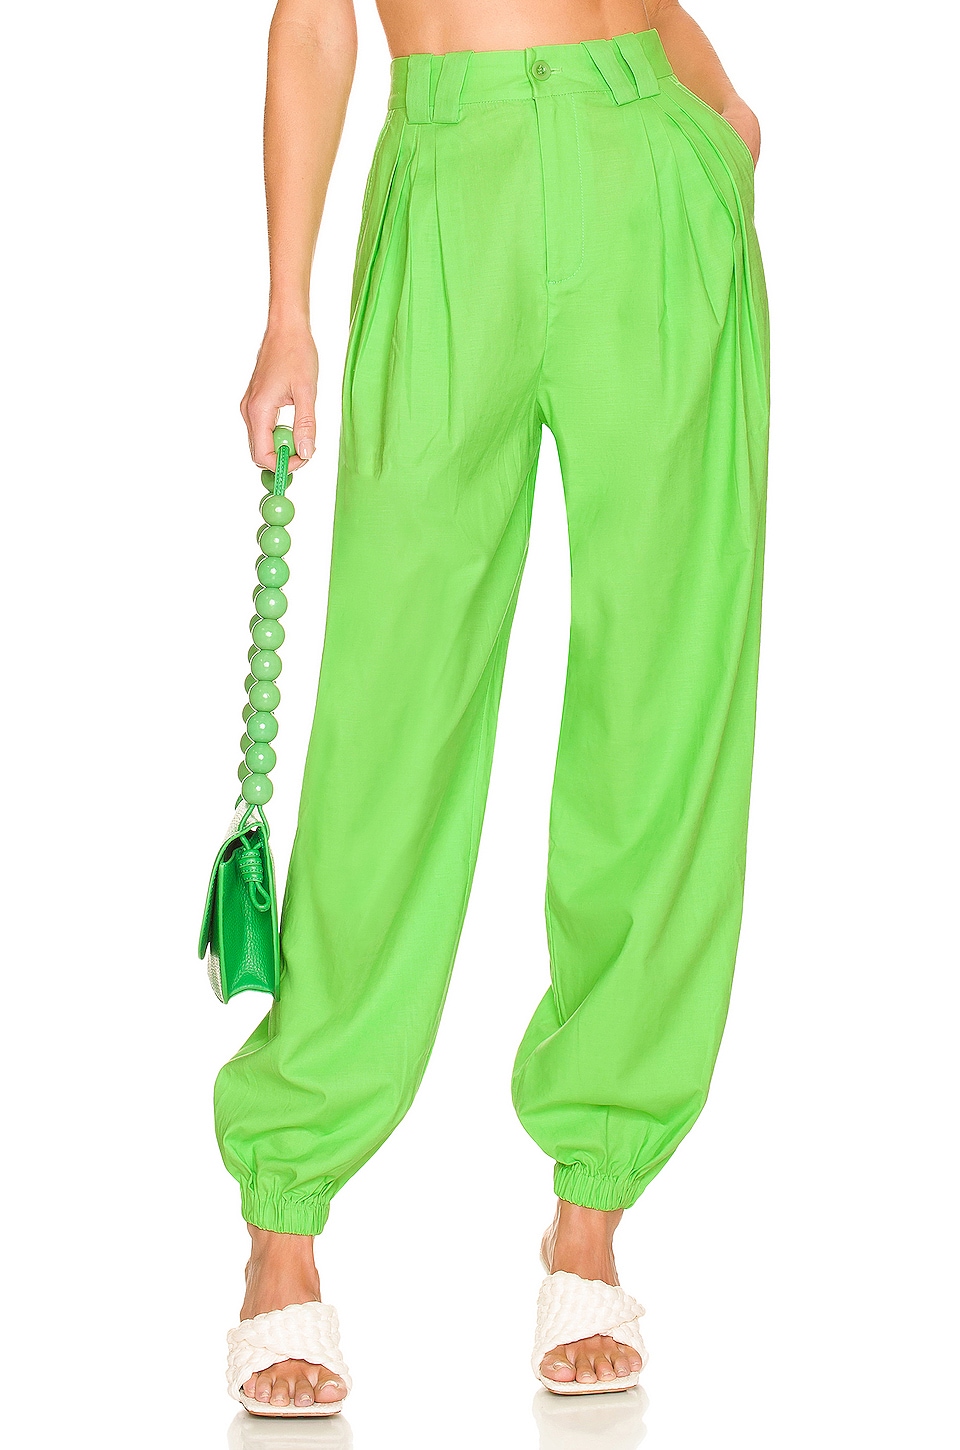 Lime Green Pants Outfit | Neon outfits, Neon fashion, Neon green outfits